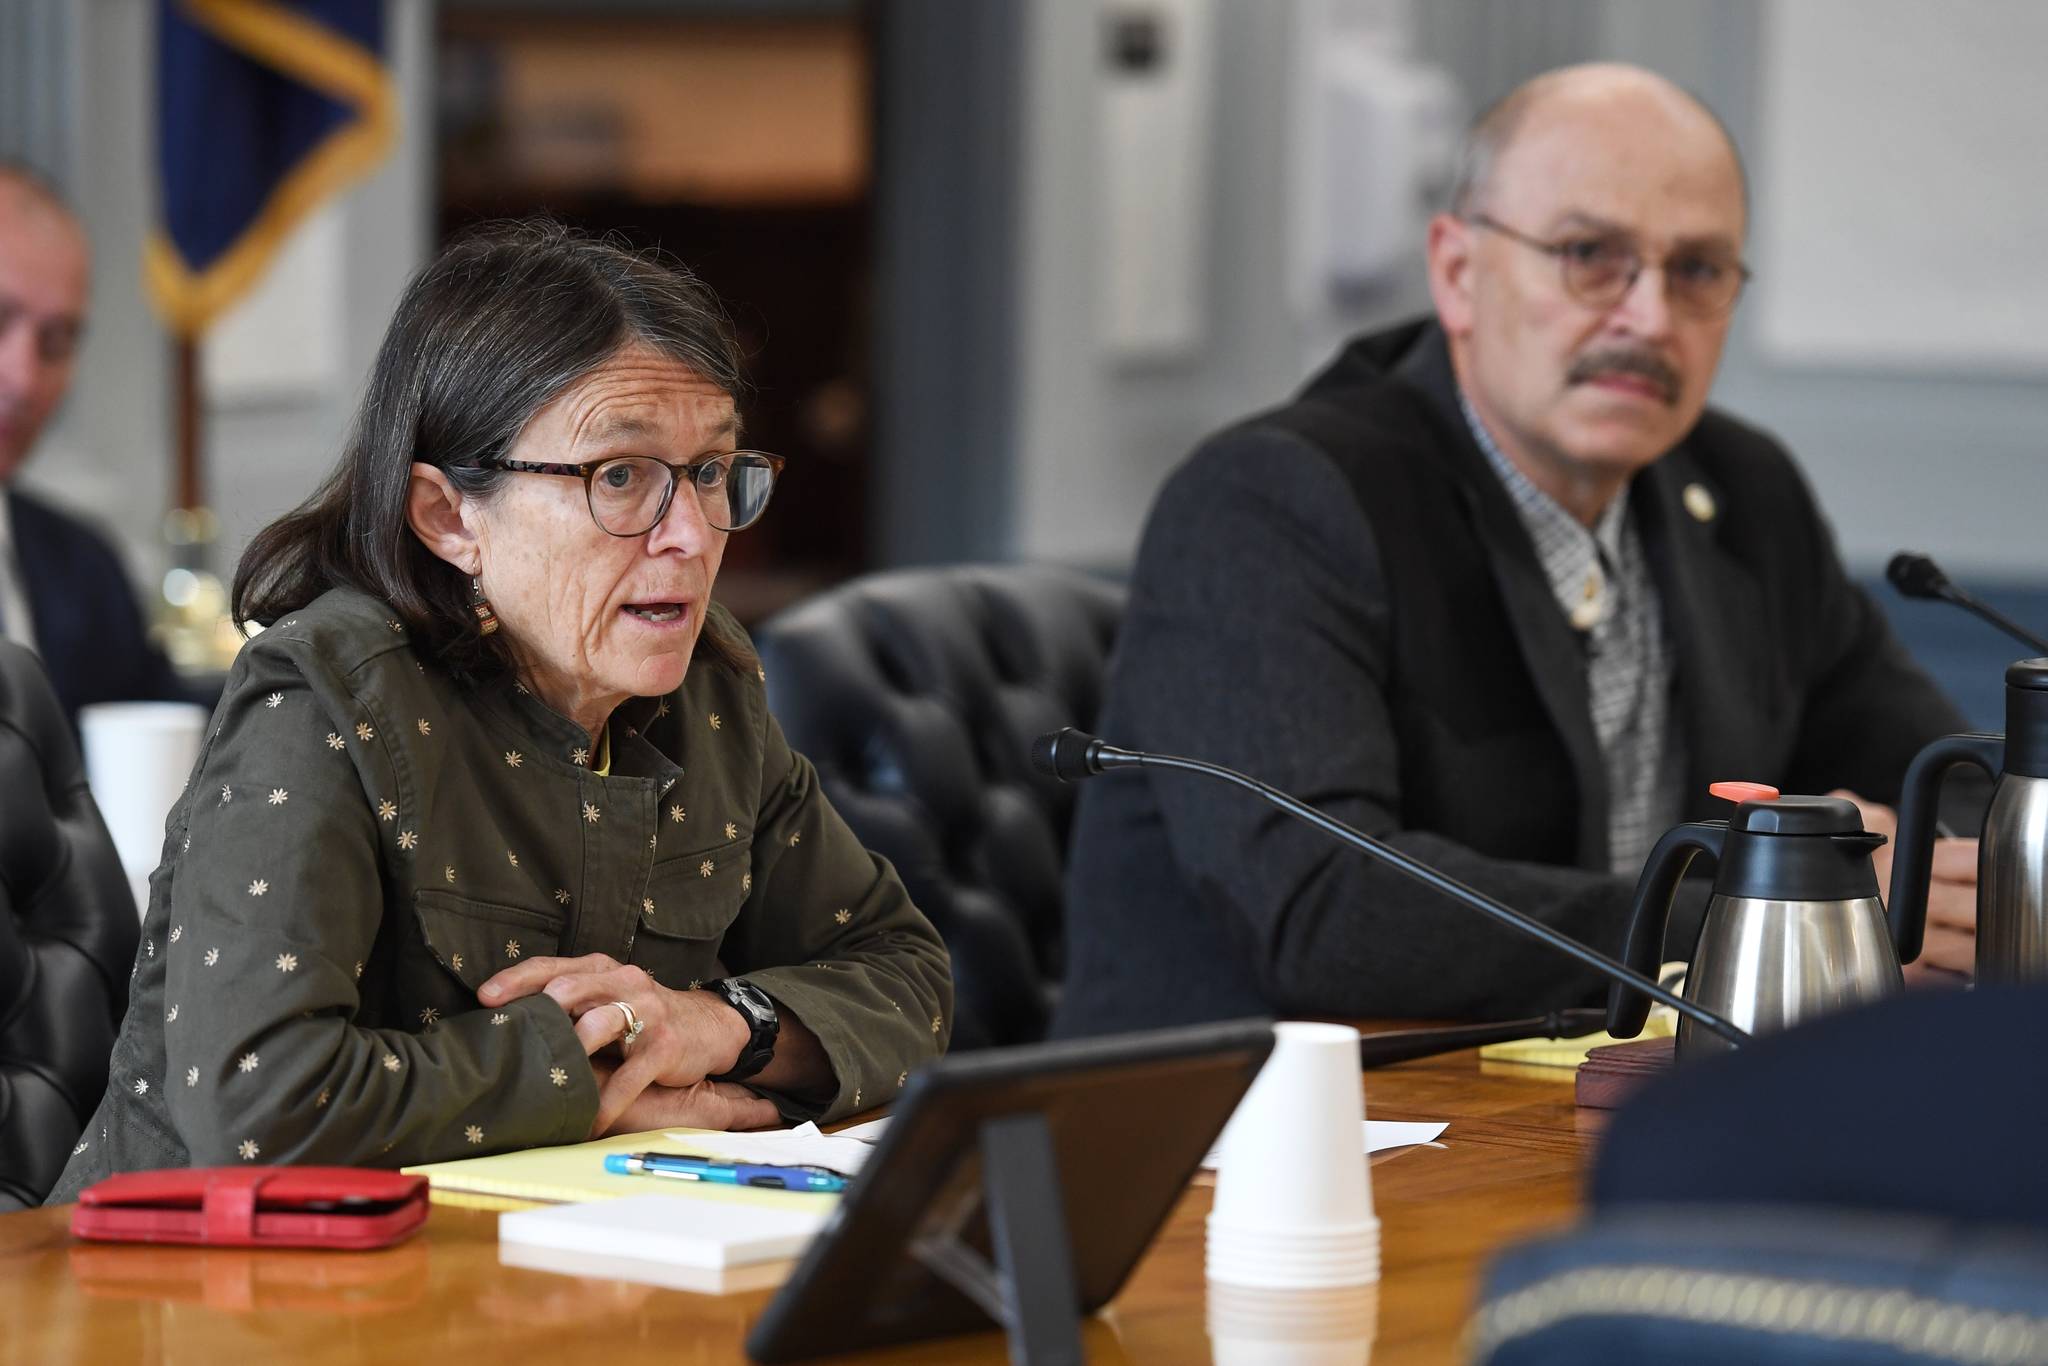 Co-Chairs Rep. Jennifer Johnston, R-Anchorage, left, and Sen. Click Bishop, R-Fairbanks, talk about the work to be done during the first meeting of a joint committee to work on the future of the Alaska Permanent Fund Dividend at the Capitol on Wednesday, June 12, 2019. (Michael Penn | Juneau Empire)